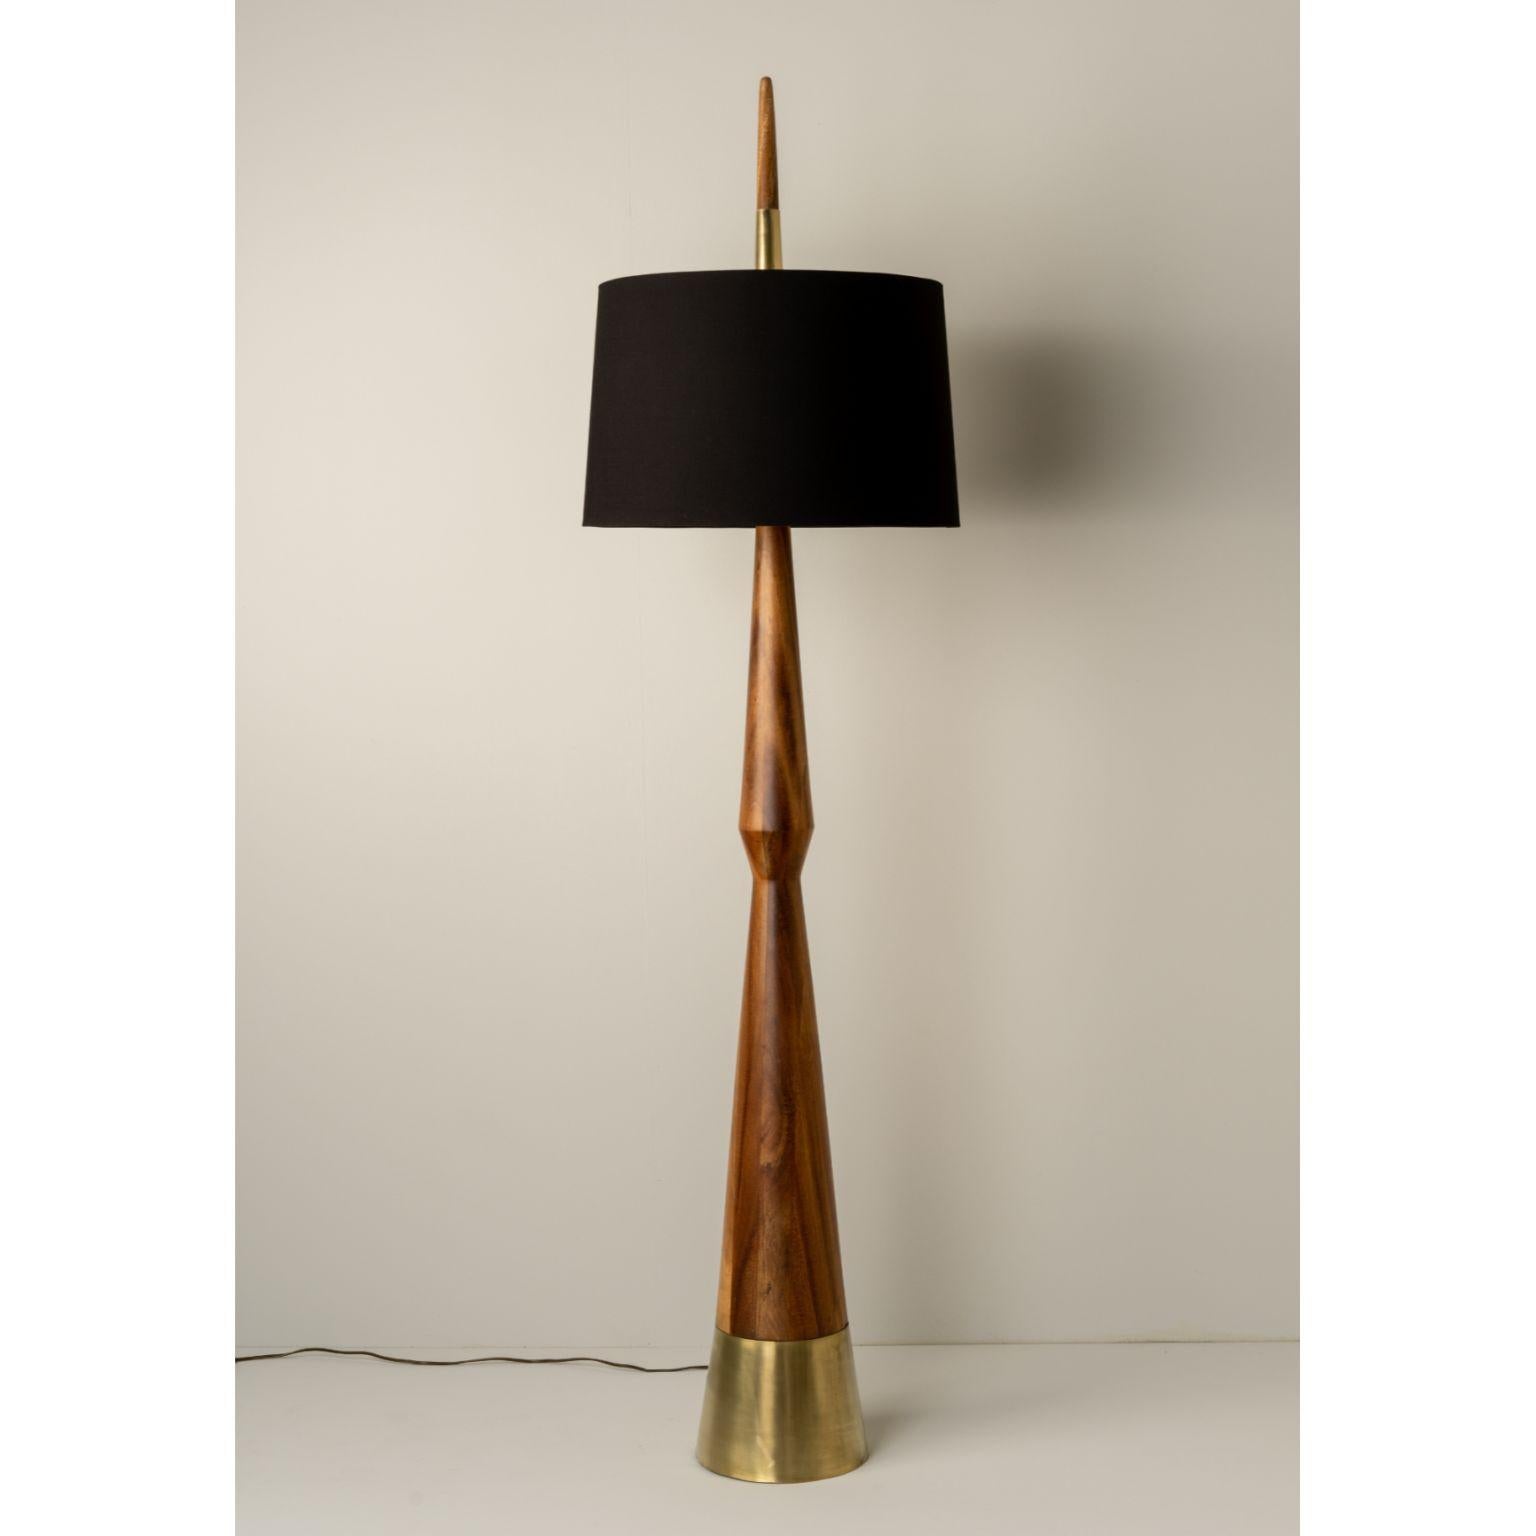 Apolo Floor Lamp by Isabel Moncada
Dimensions: Ø 56 x H 211 cm.
Materials: Fiberglass, linen, gold lacquer and natural matte Parota wood.

The obelisk is named after the famous Greek deity that holds a bow and arrow. The tip of this lamp points